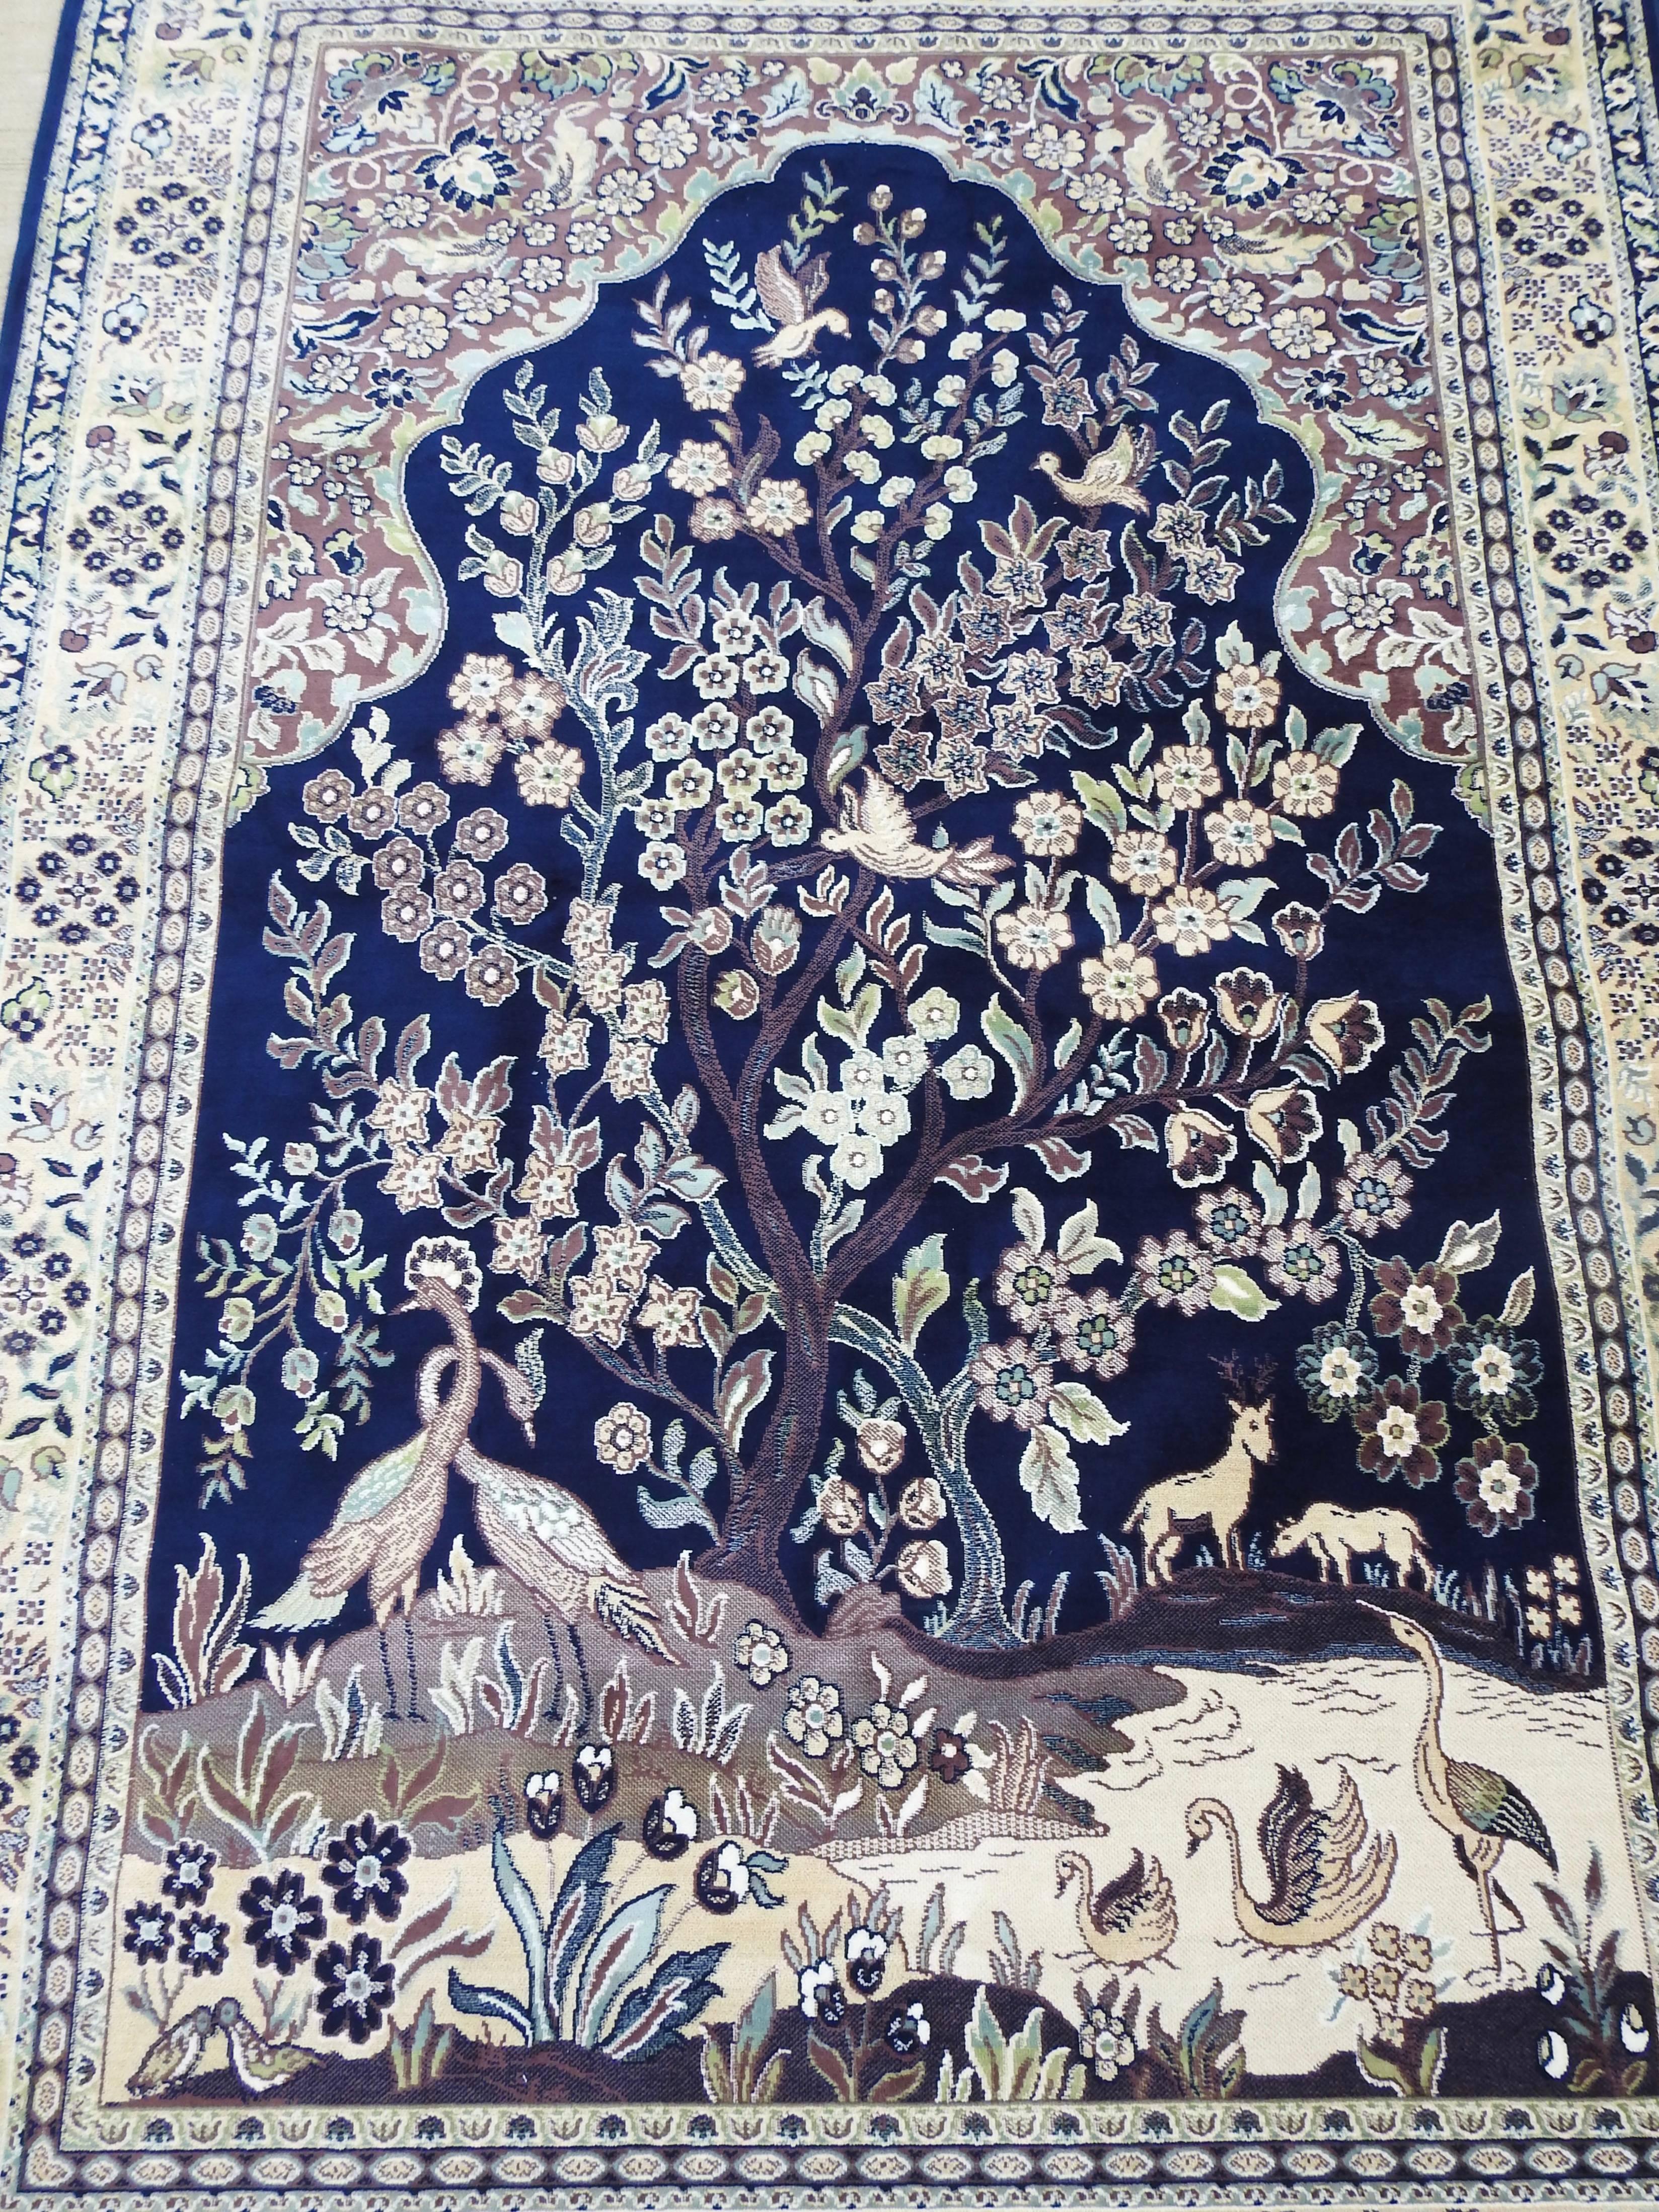 Soft shades of navy blue, lavender and cream make this rug a beautiful melody of silk. Flowers, trees and a variety of animals are surrounded by a decorative border. There is fringe on the ends to complete the look. A rod pocket has been added to